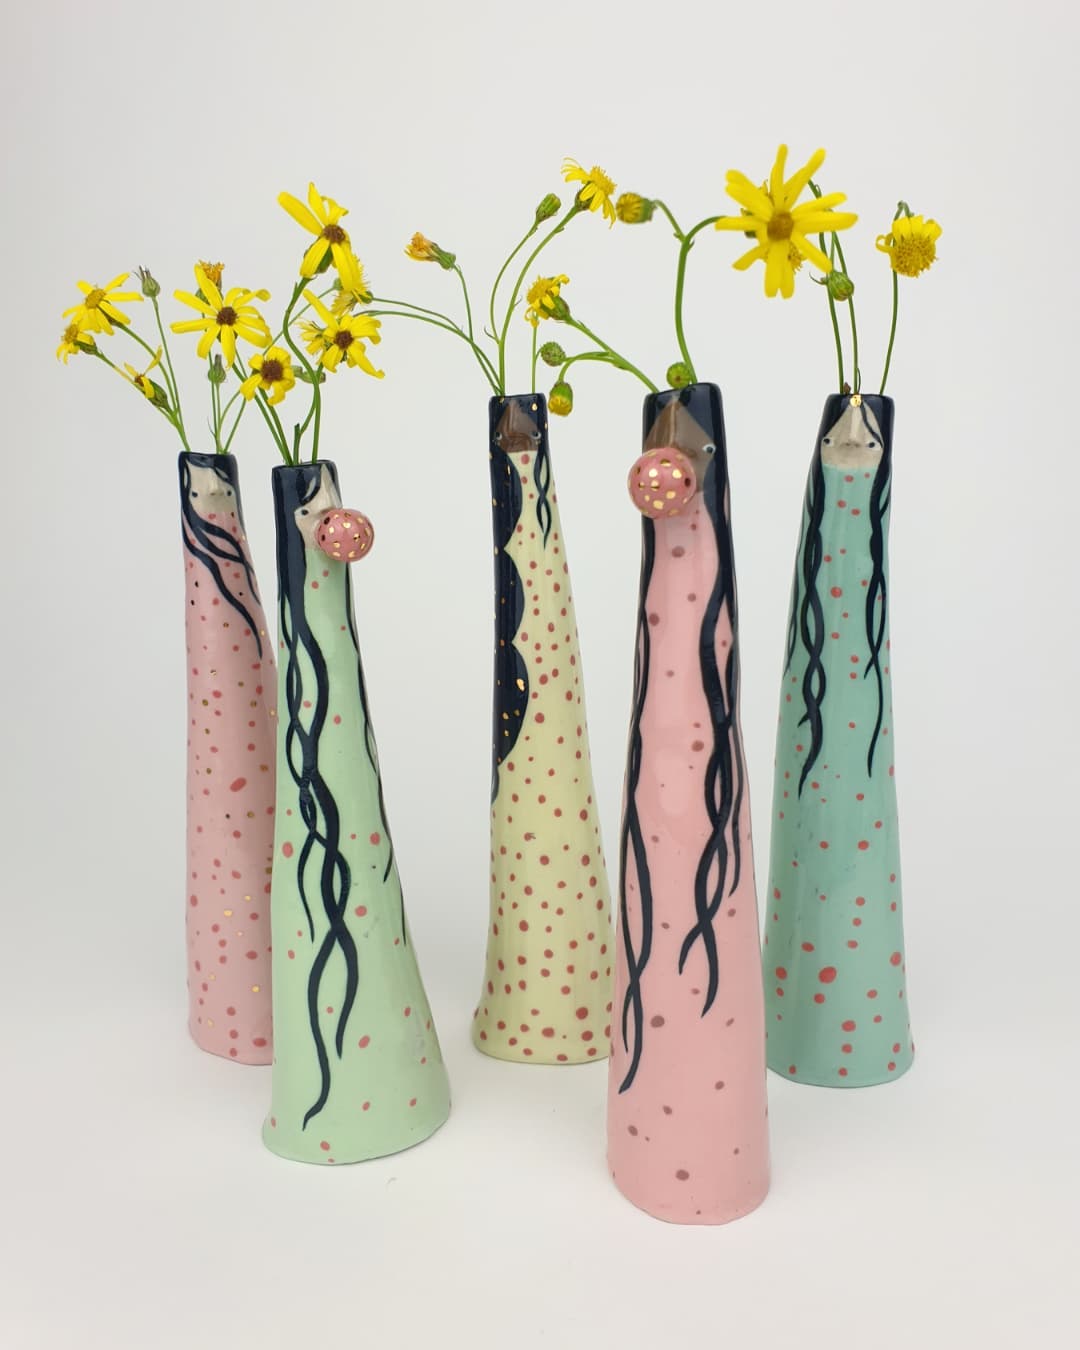 Lovely Porcelain Pieces Patterned With Quirky Cartoon Like Figures By Sandra Apperloo 8